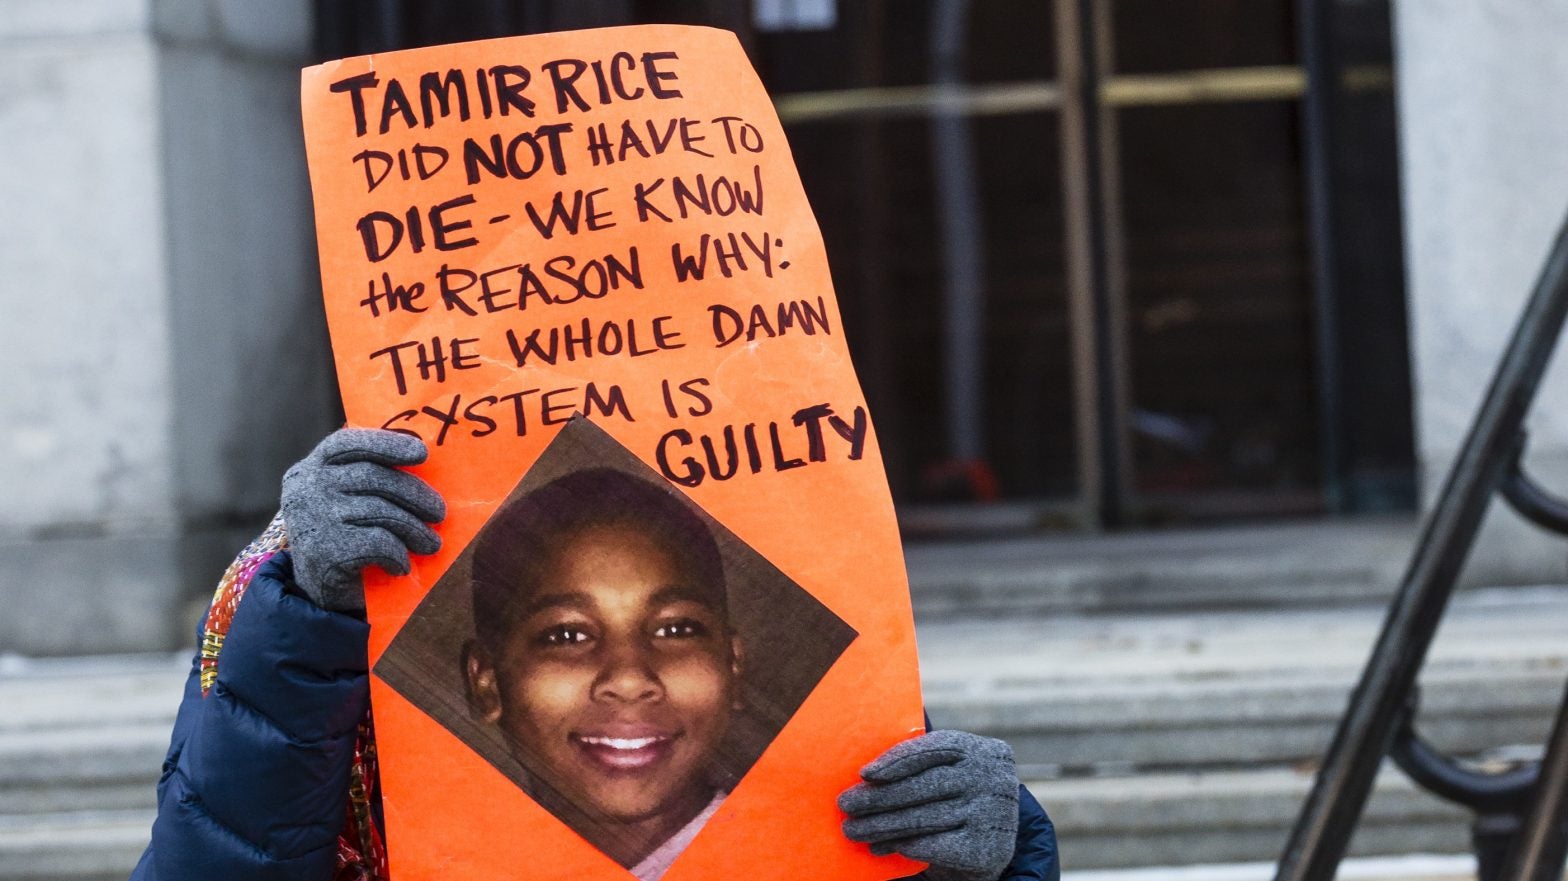 DOJ Stands By Its Decision To Not Reopen Investigation Into Tamir Rice's Death